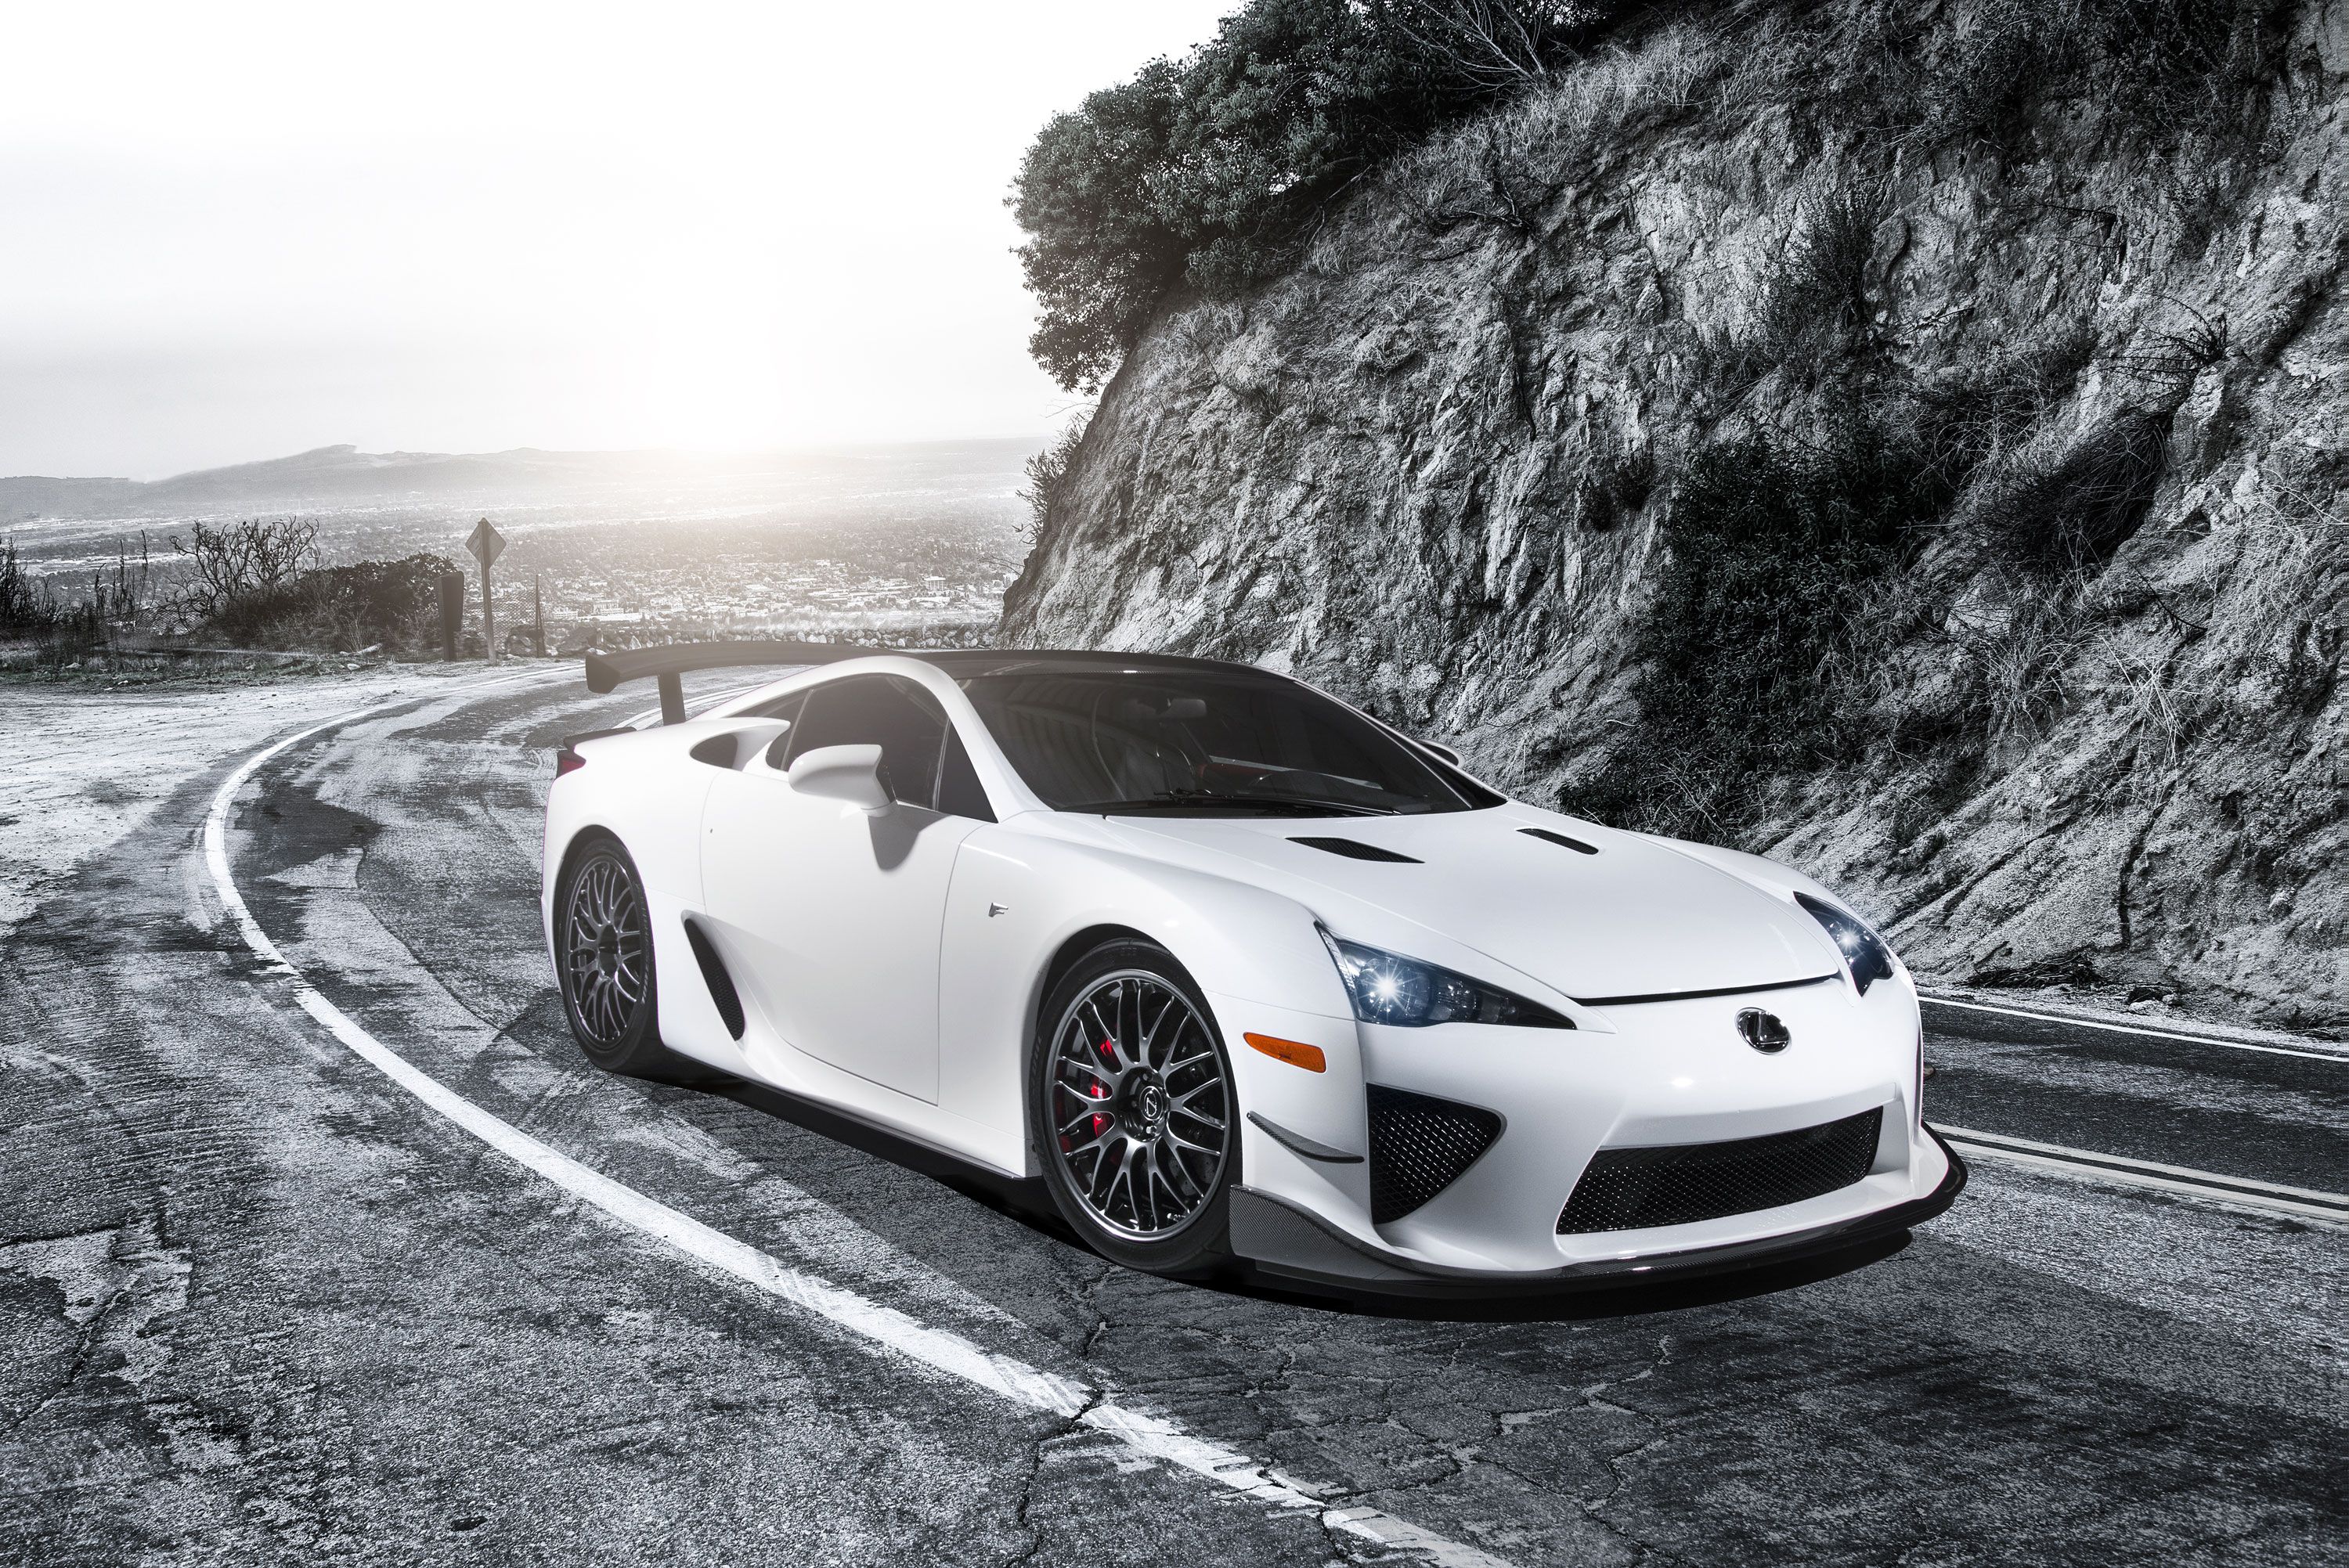 2014 Report: BMW and Lexus Joining Forces for a New Supercar